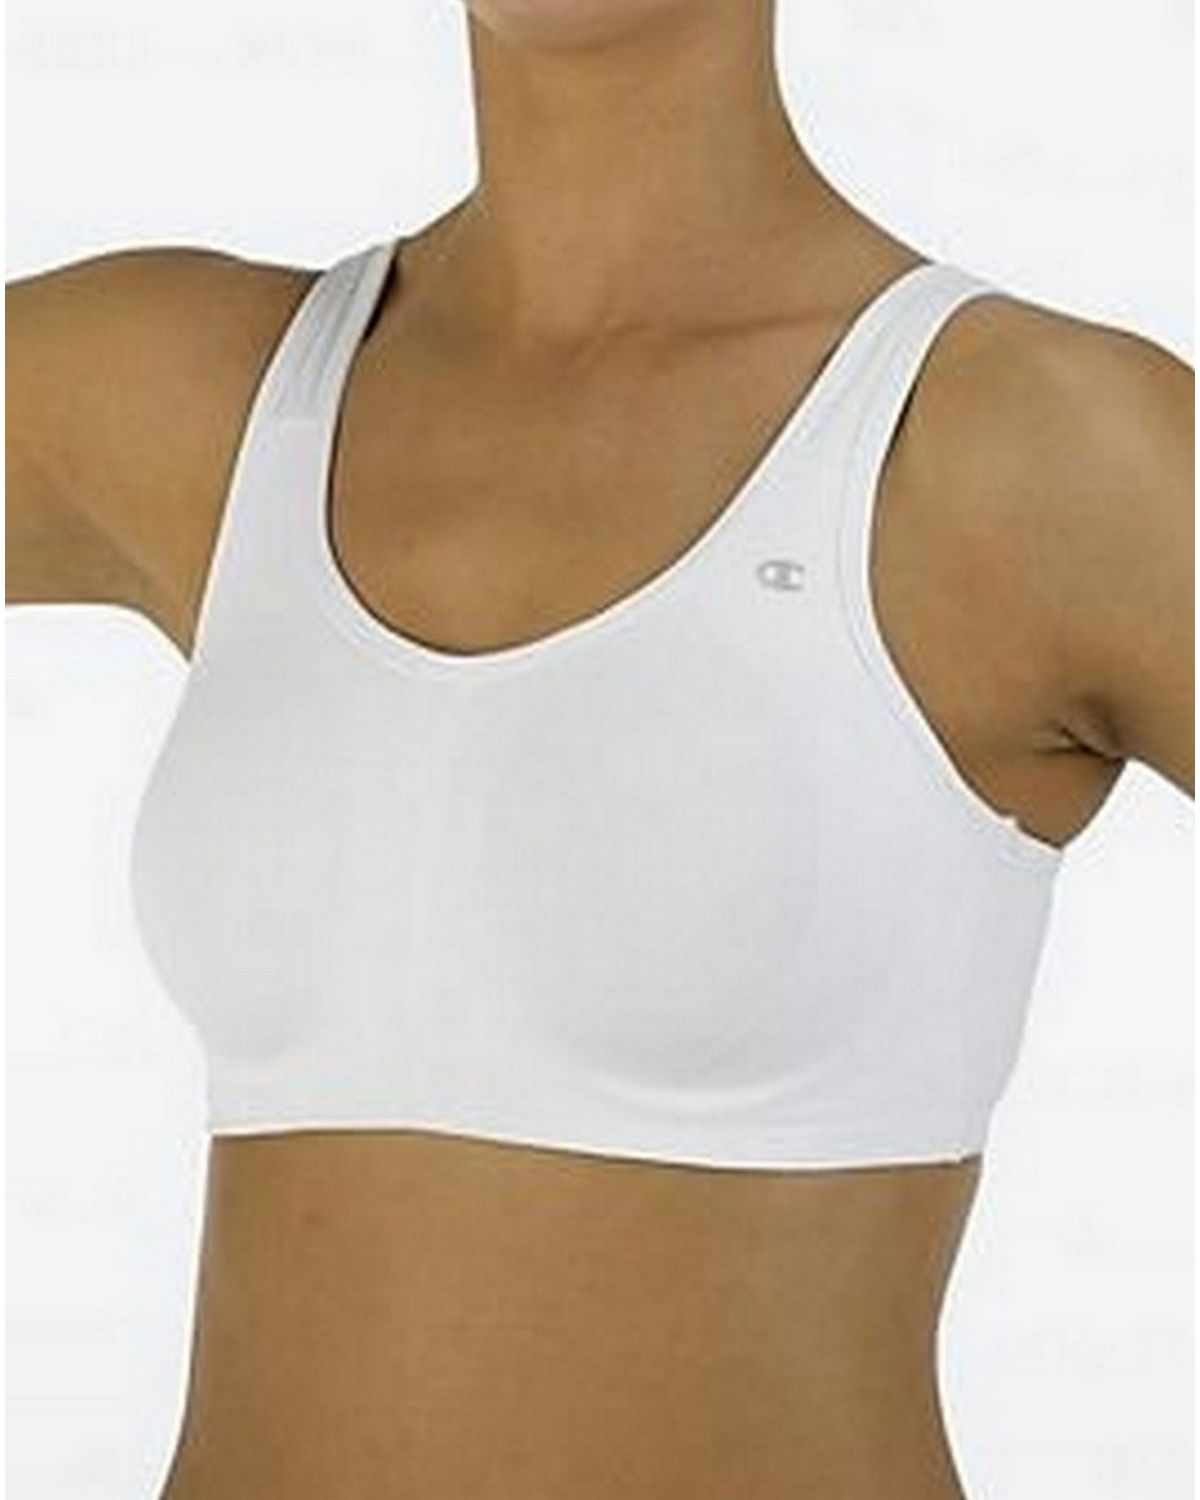 Champion Double Dry Compression Vented Sports Bra